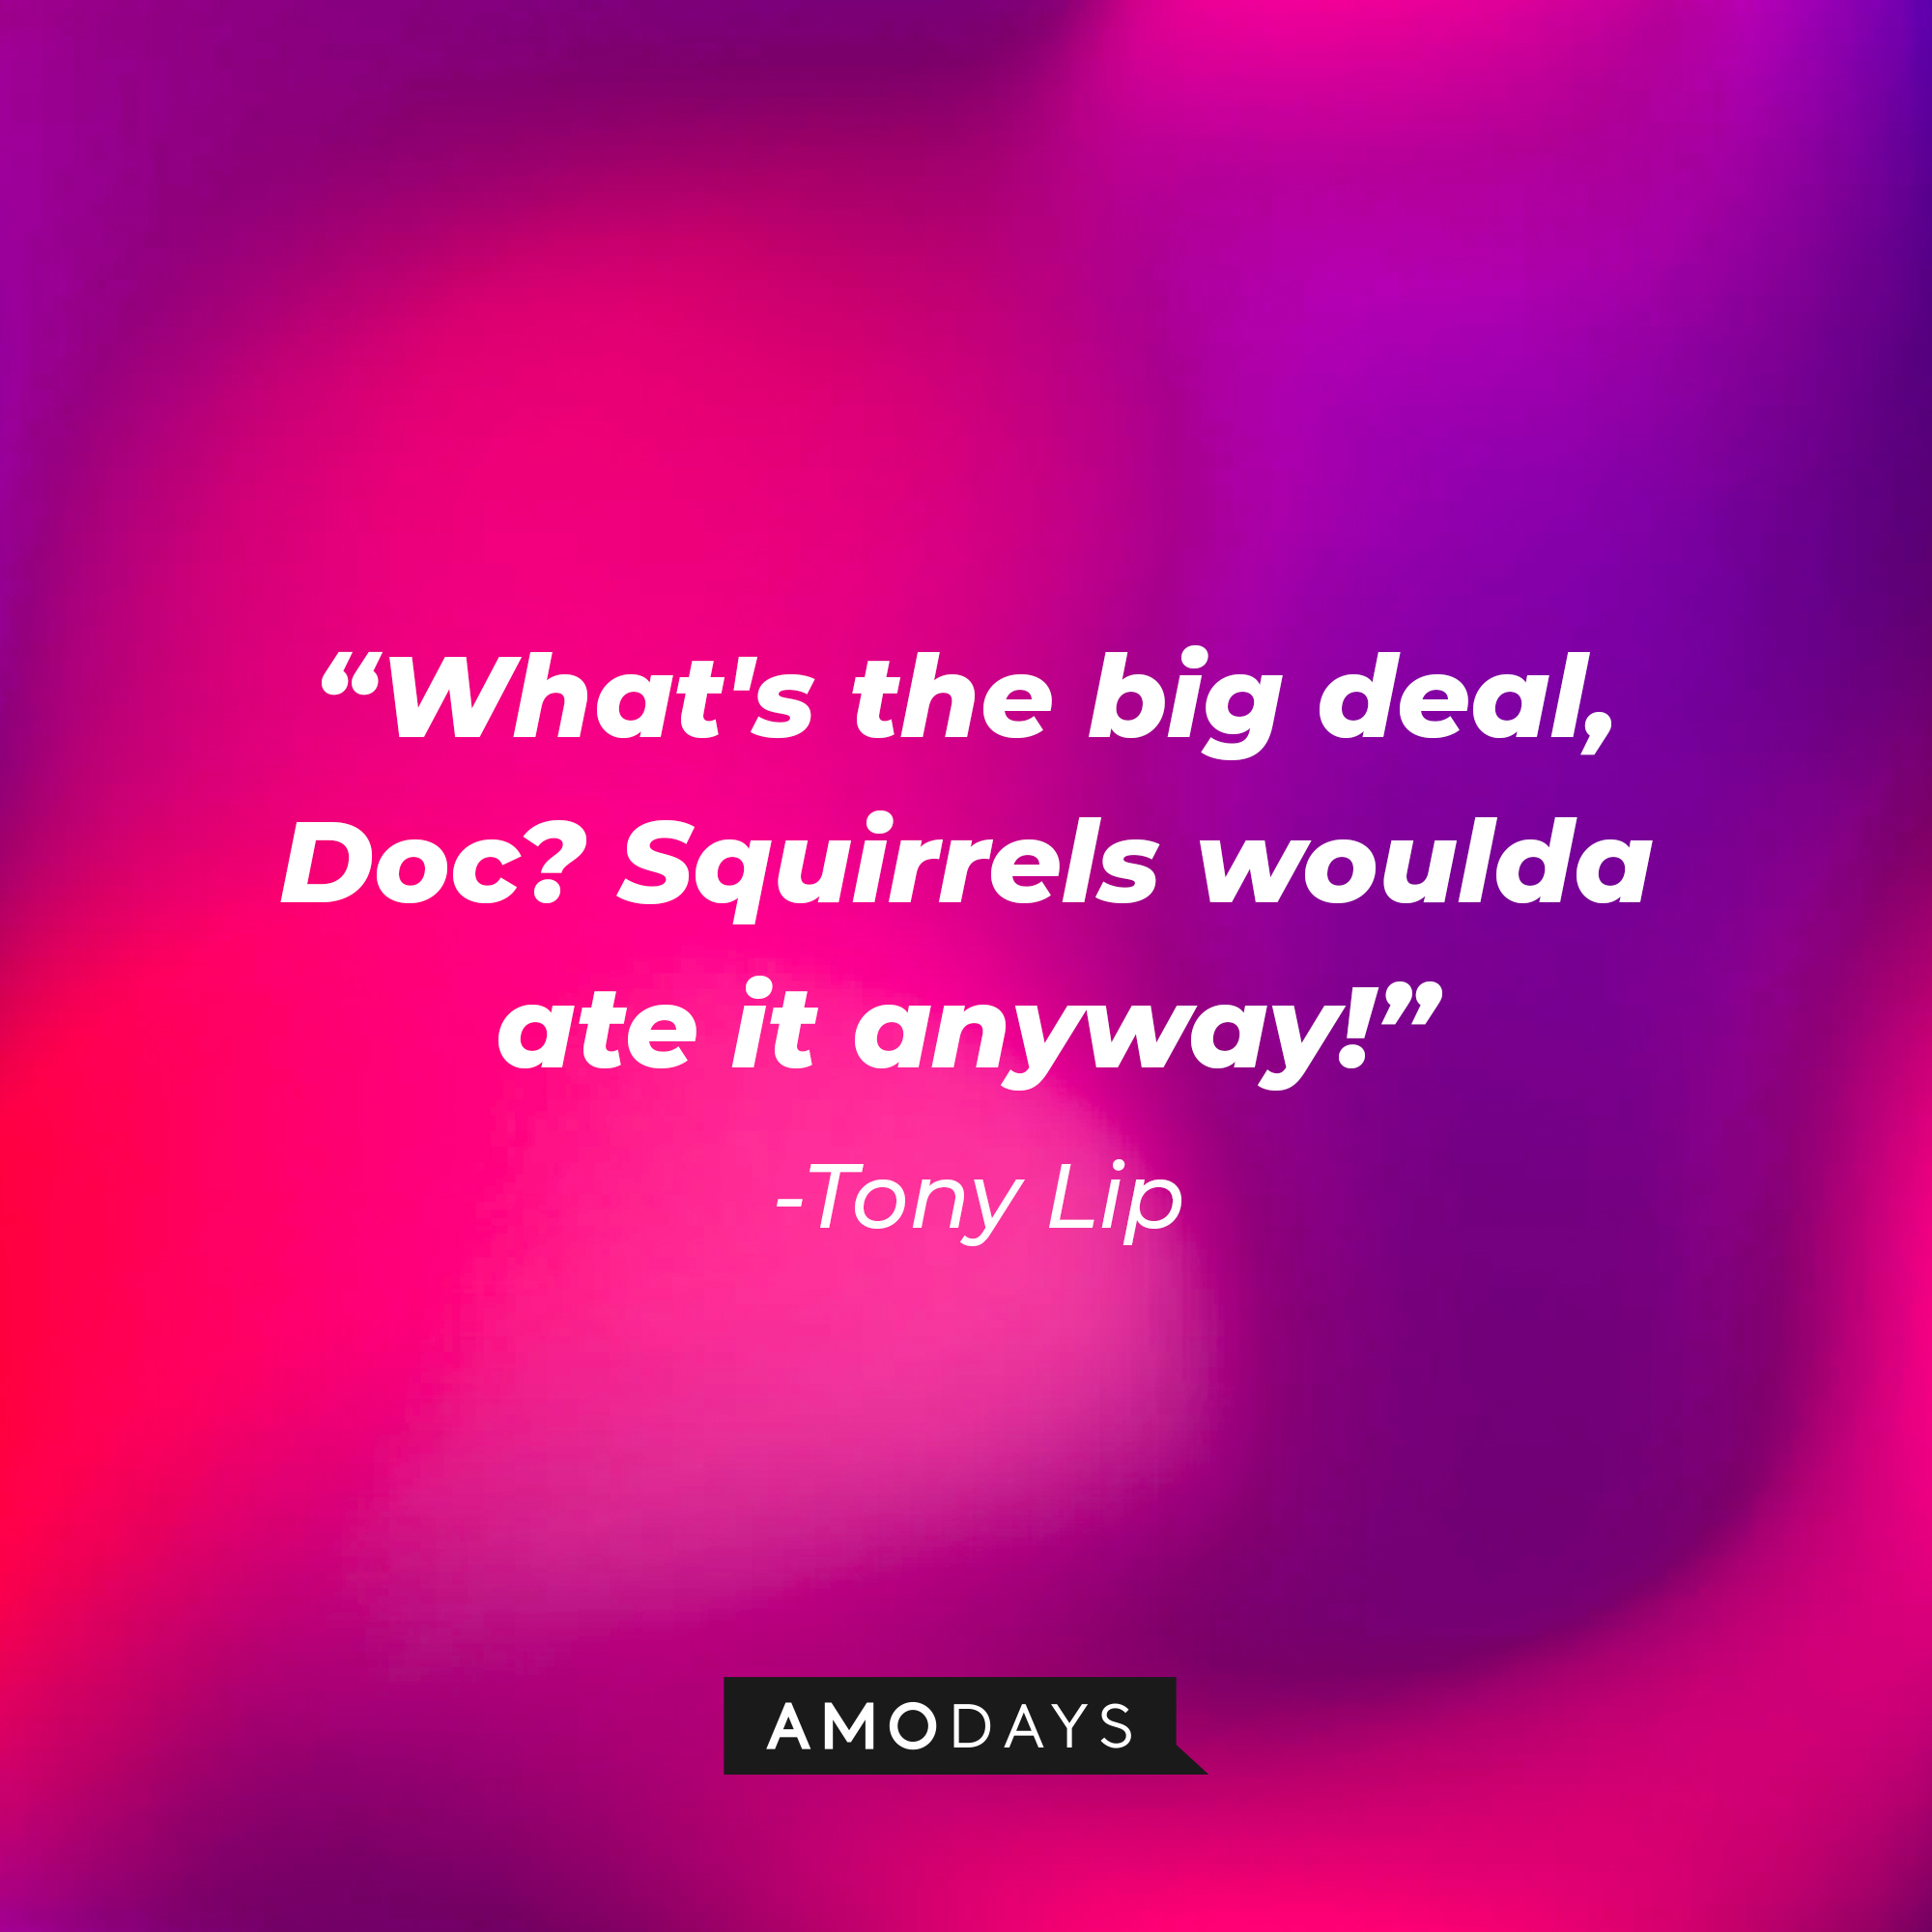 Tony Lip's quote: “What's the big deal, Doc? Squirrels woulda ate it anyway!” | Source: Amodays